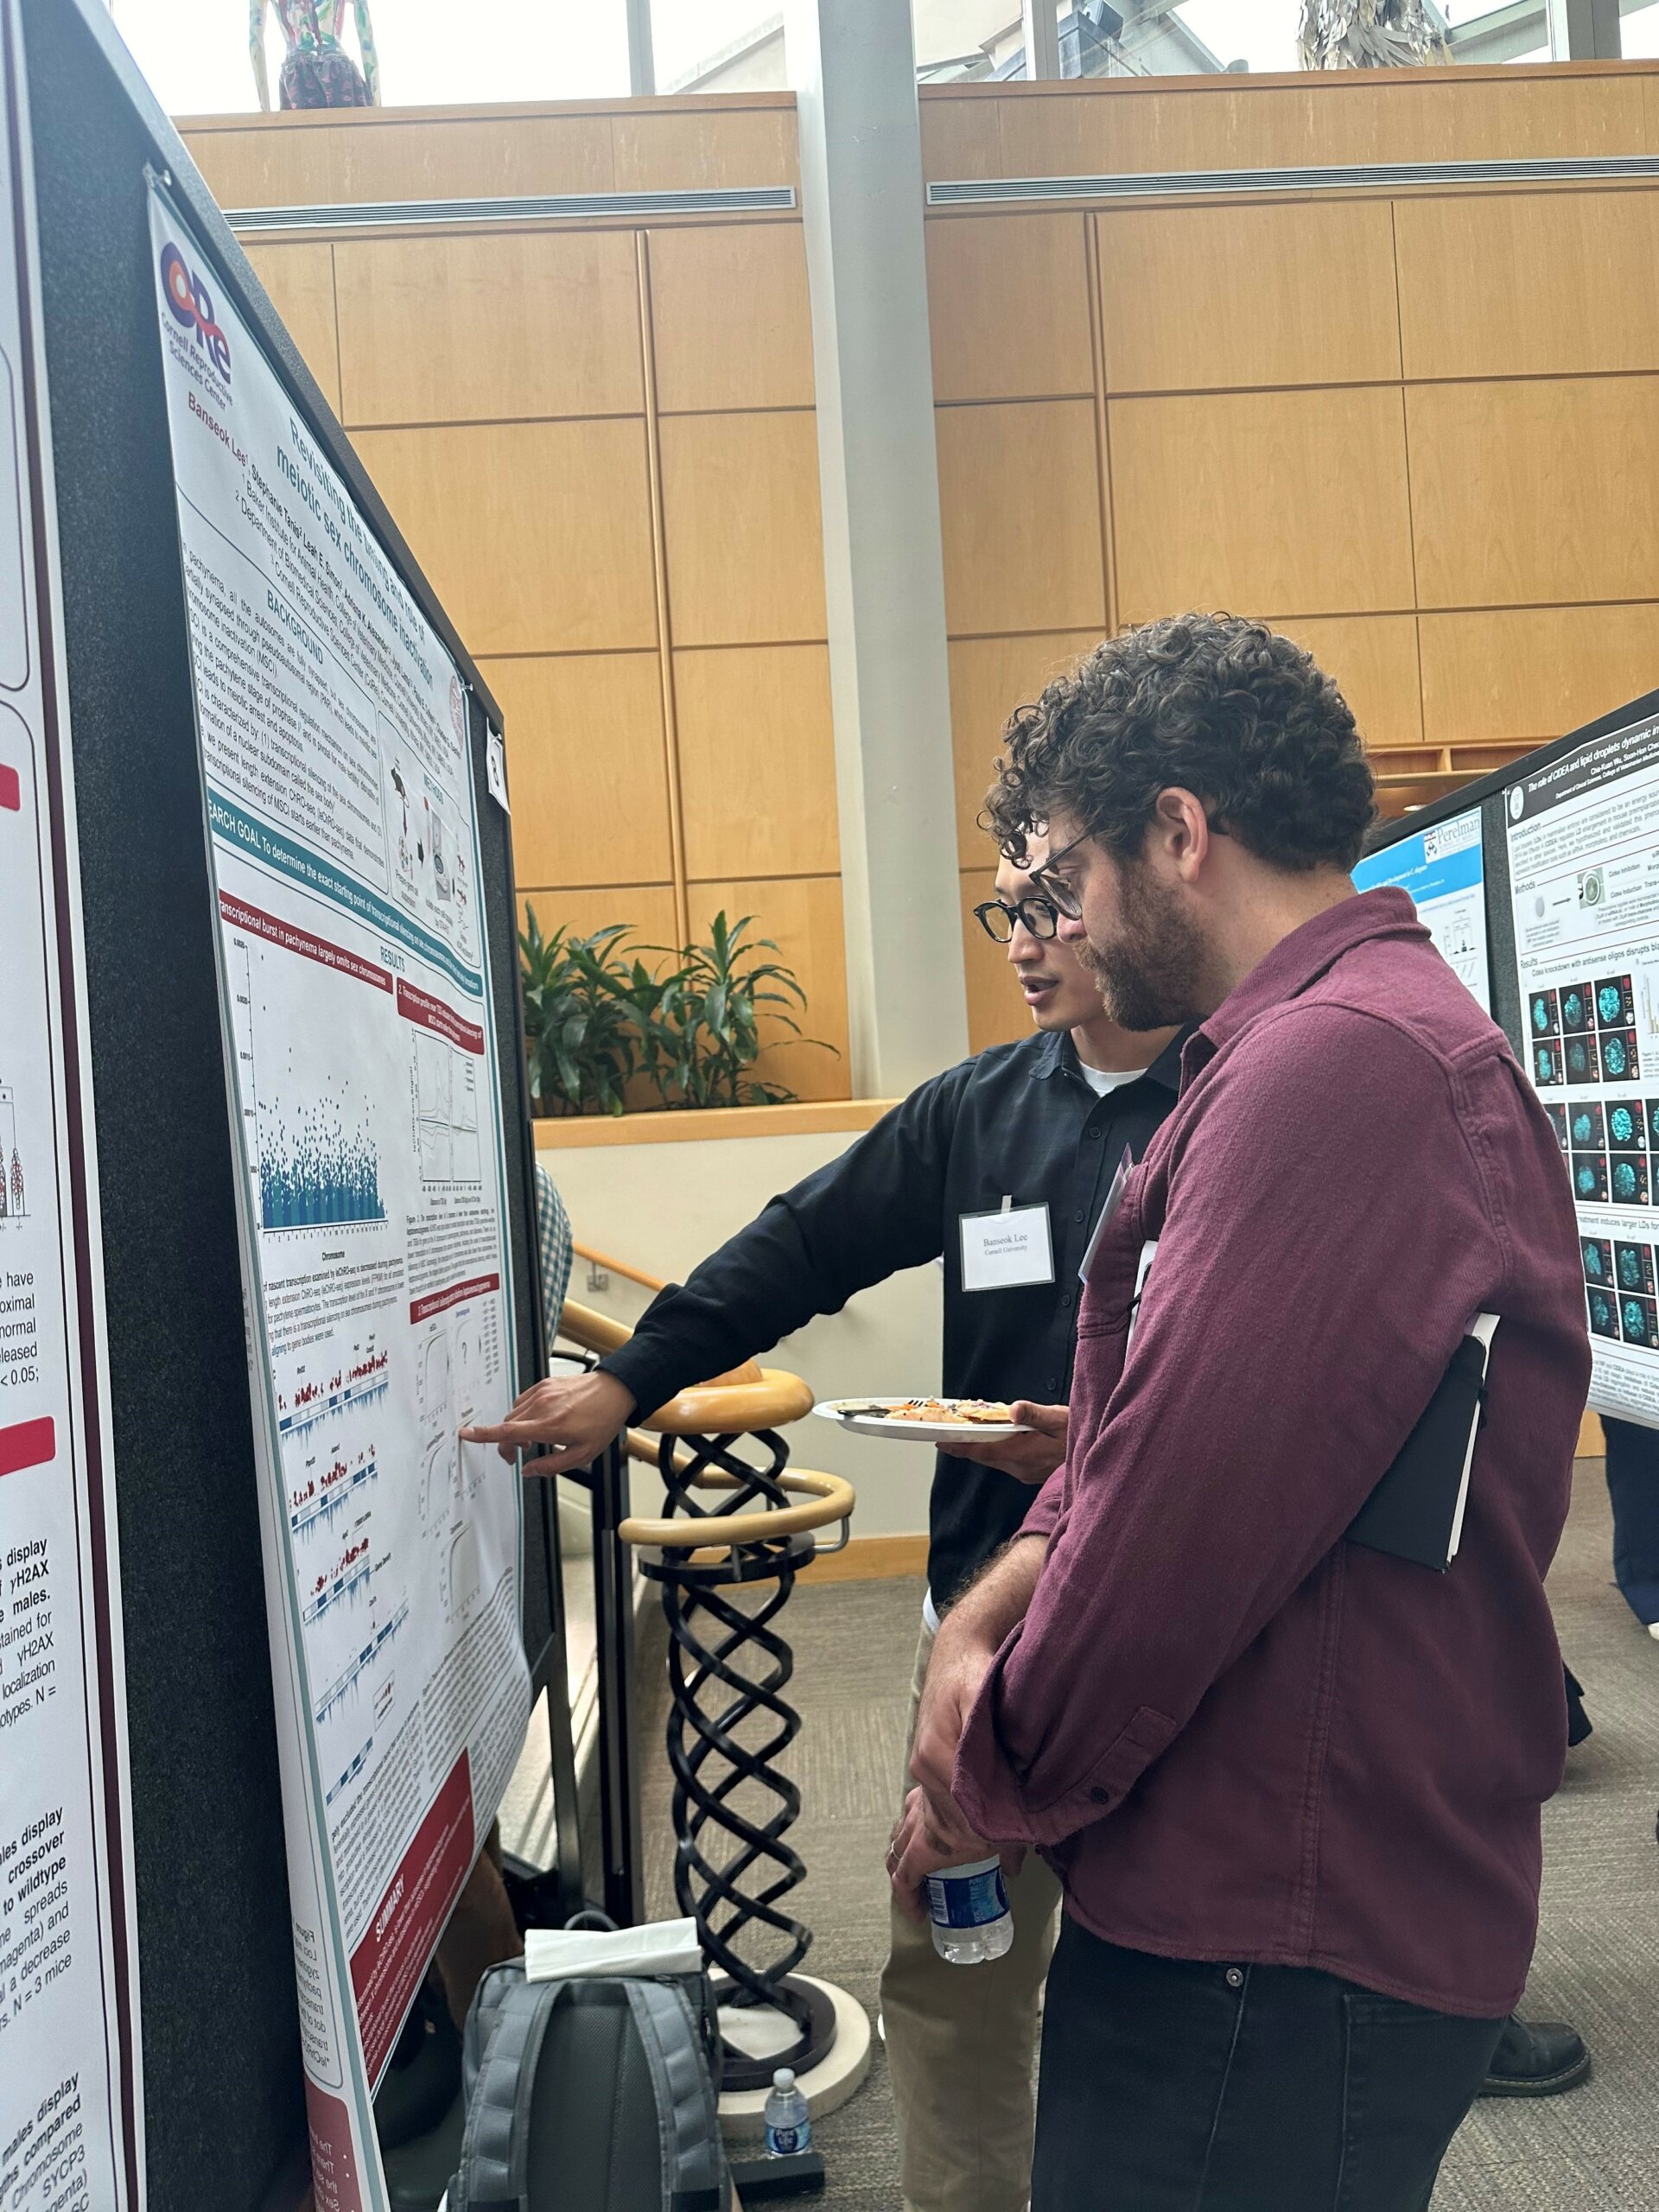 Ian Wolff and Banseok Lee discussing a poster at the Tri-Repro poster session